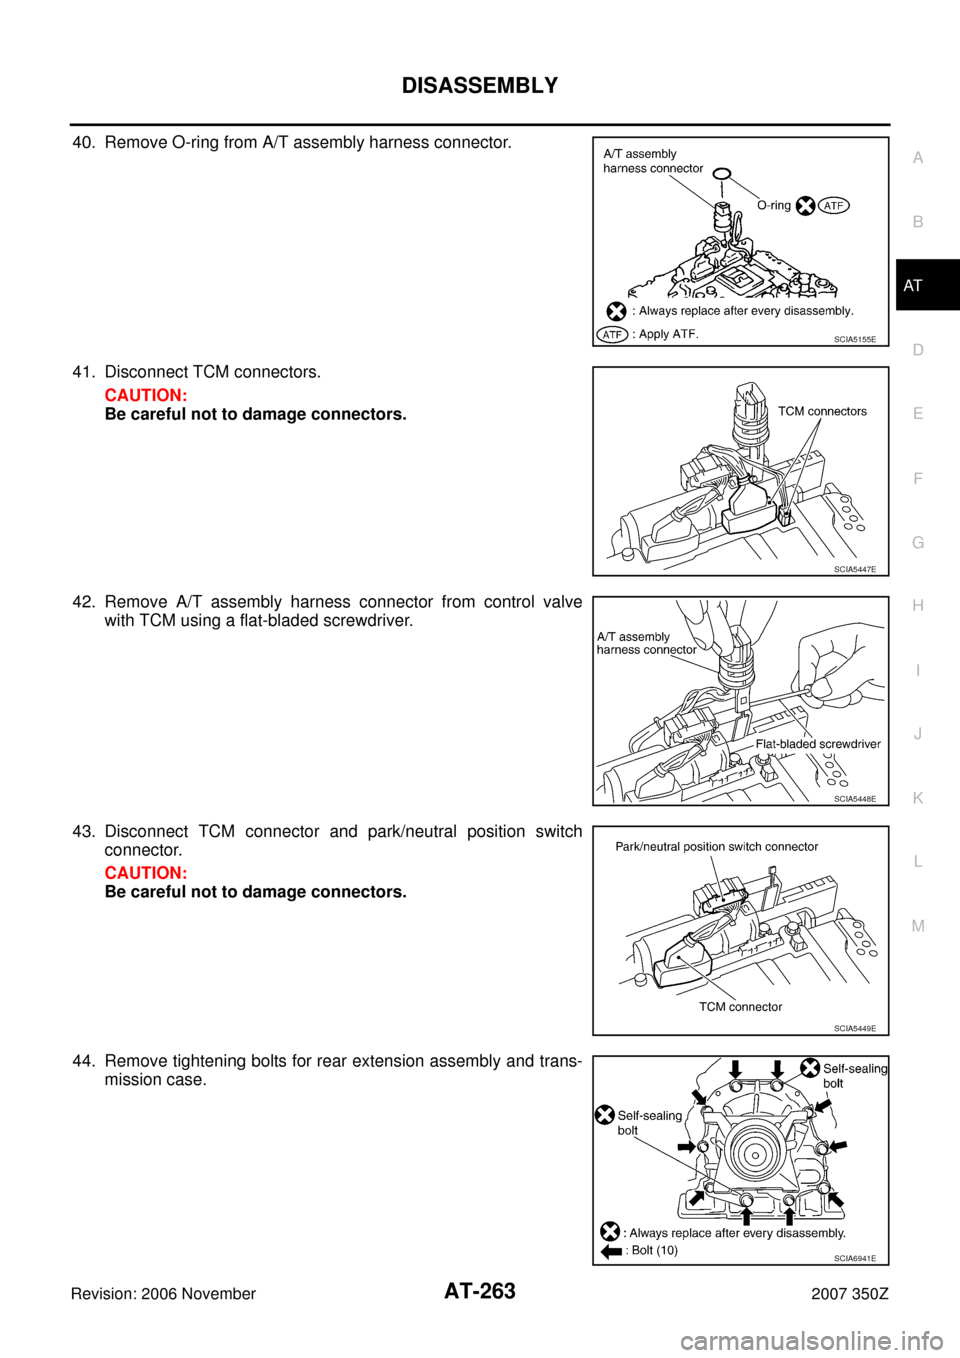 NISSAN 350Z 2007 Z33 Automatic Transmission Workshop Manual DISASSEMBLY
AT-263
D
E
F
G
H
I
J
K
L
MA
B
AT
Revision: 2006 November2007 350Z
40. Remove O-ring from A/T assembly harness connector.
41. Disconnect TCM connectors.
CAUTION:
Be careful not to damage co